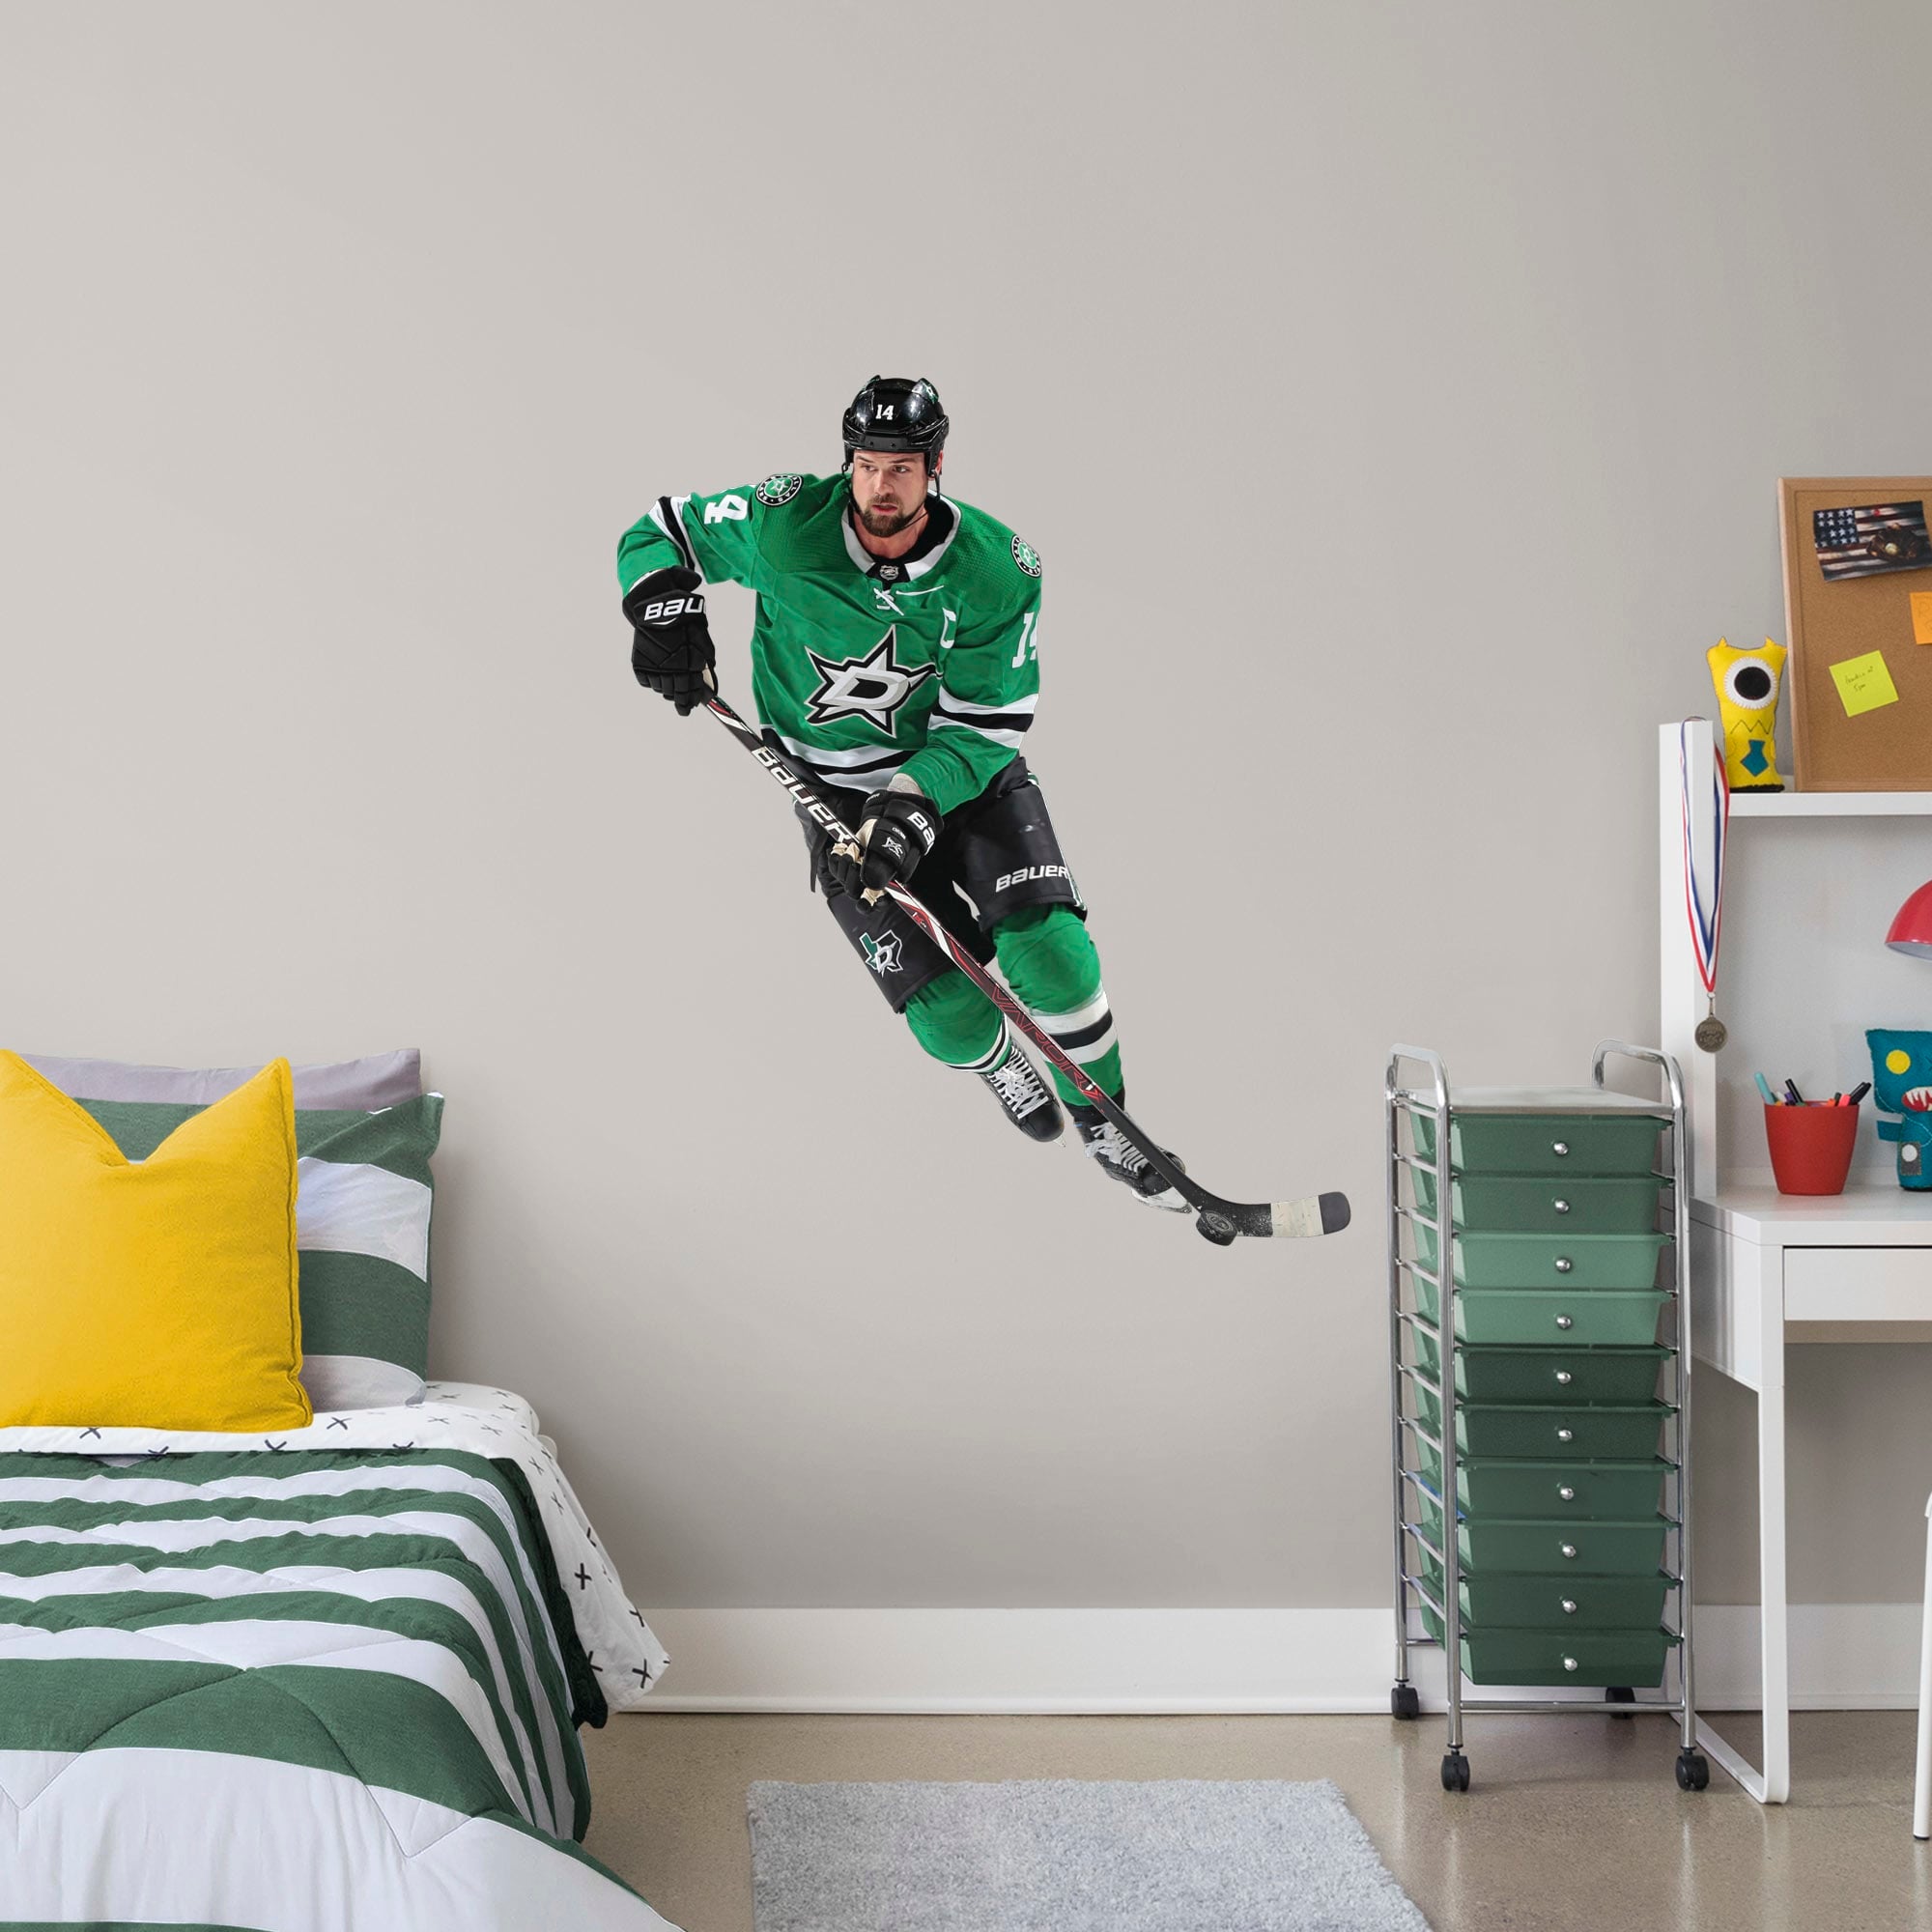 Jamie Benn for Dallas Stars - Officially Licensed NHL Removable Wall Decal Giant Athlete + 2 Team Decals (40"W x 48"H) by Fathea